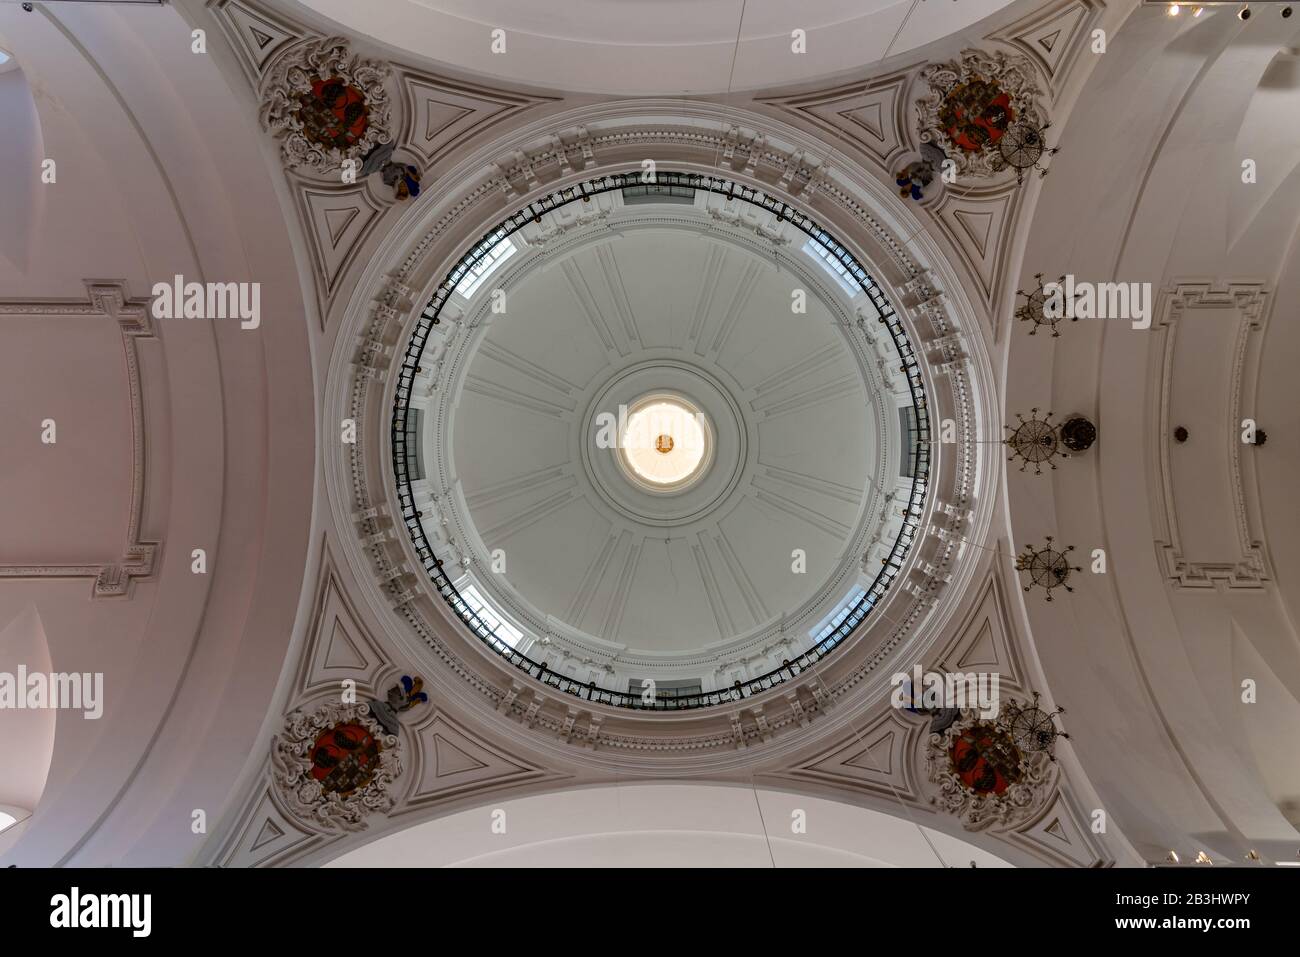 Toledo, Spain - December 6, 2019: The dome of the Church of San Ildelfonso in Toledo. Jesuit church. Directly below. Stock Photo